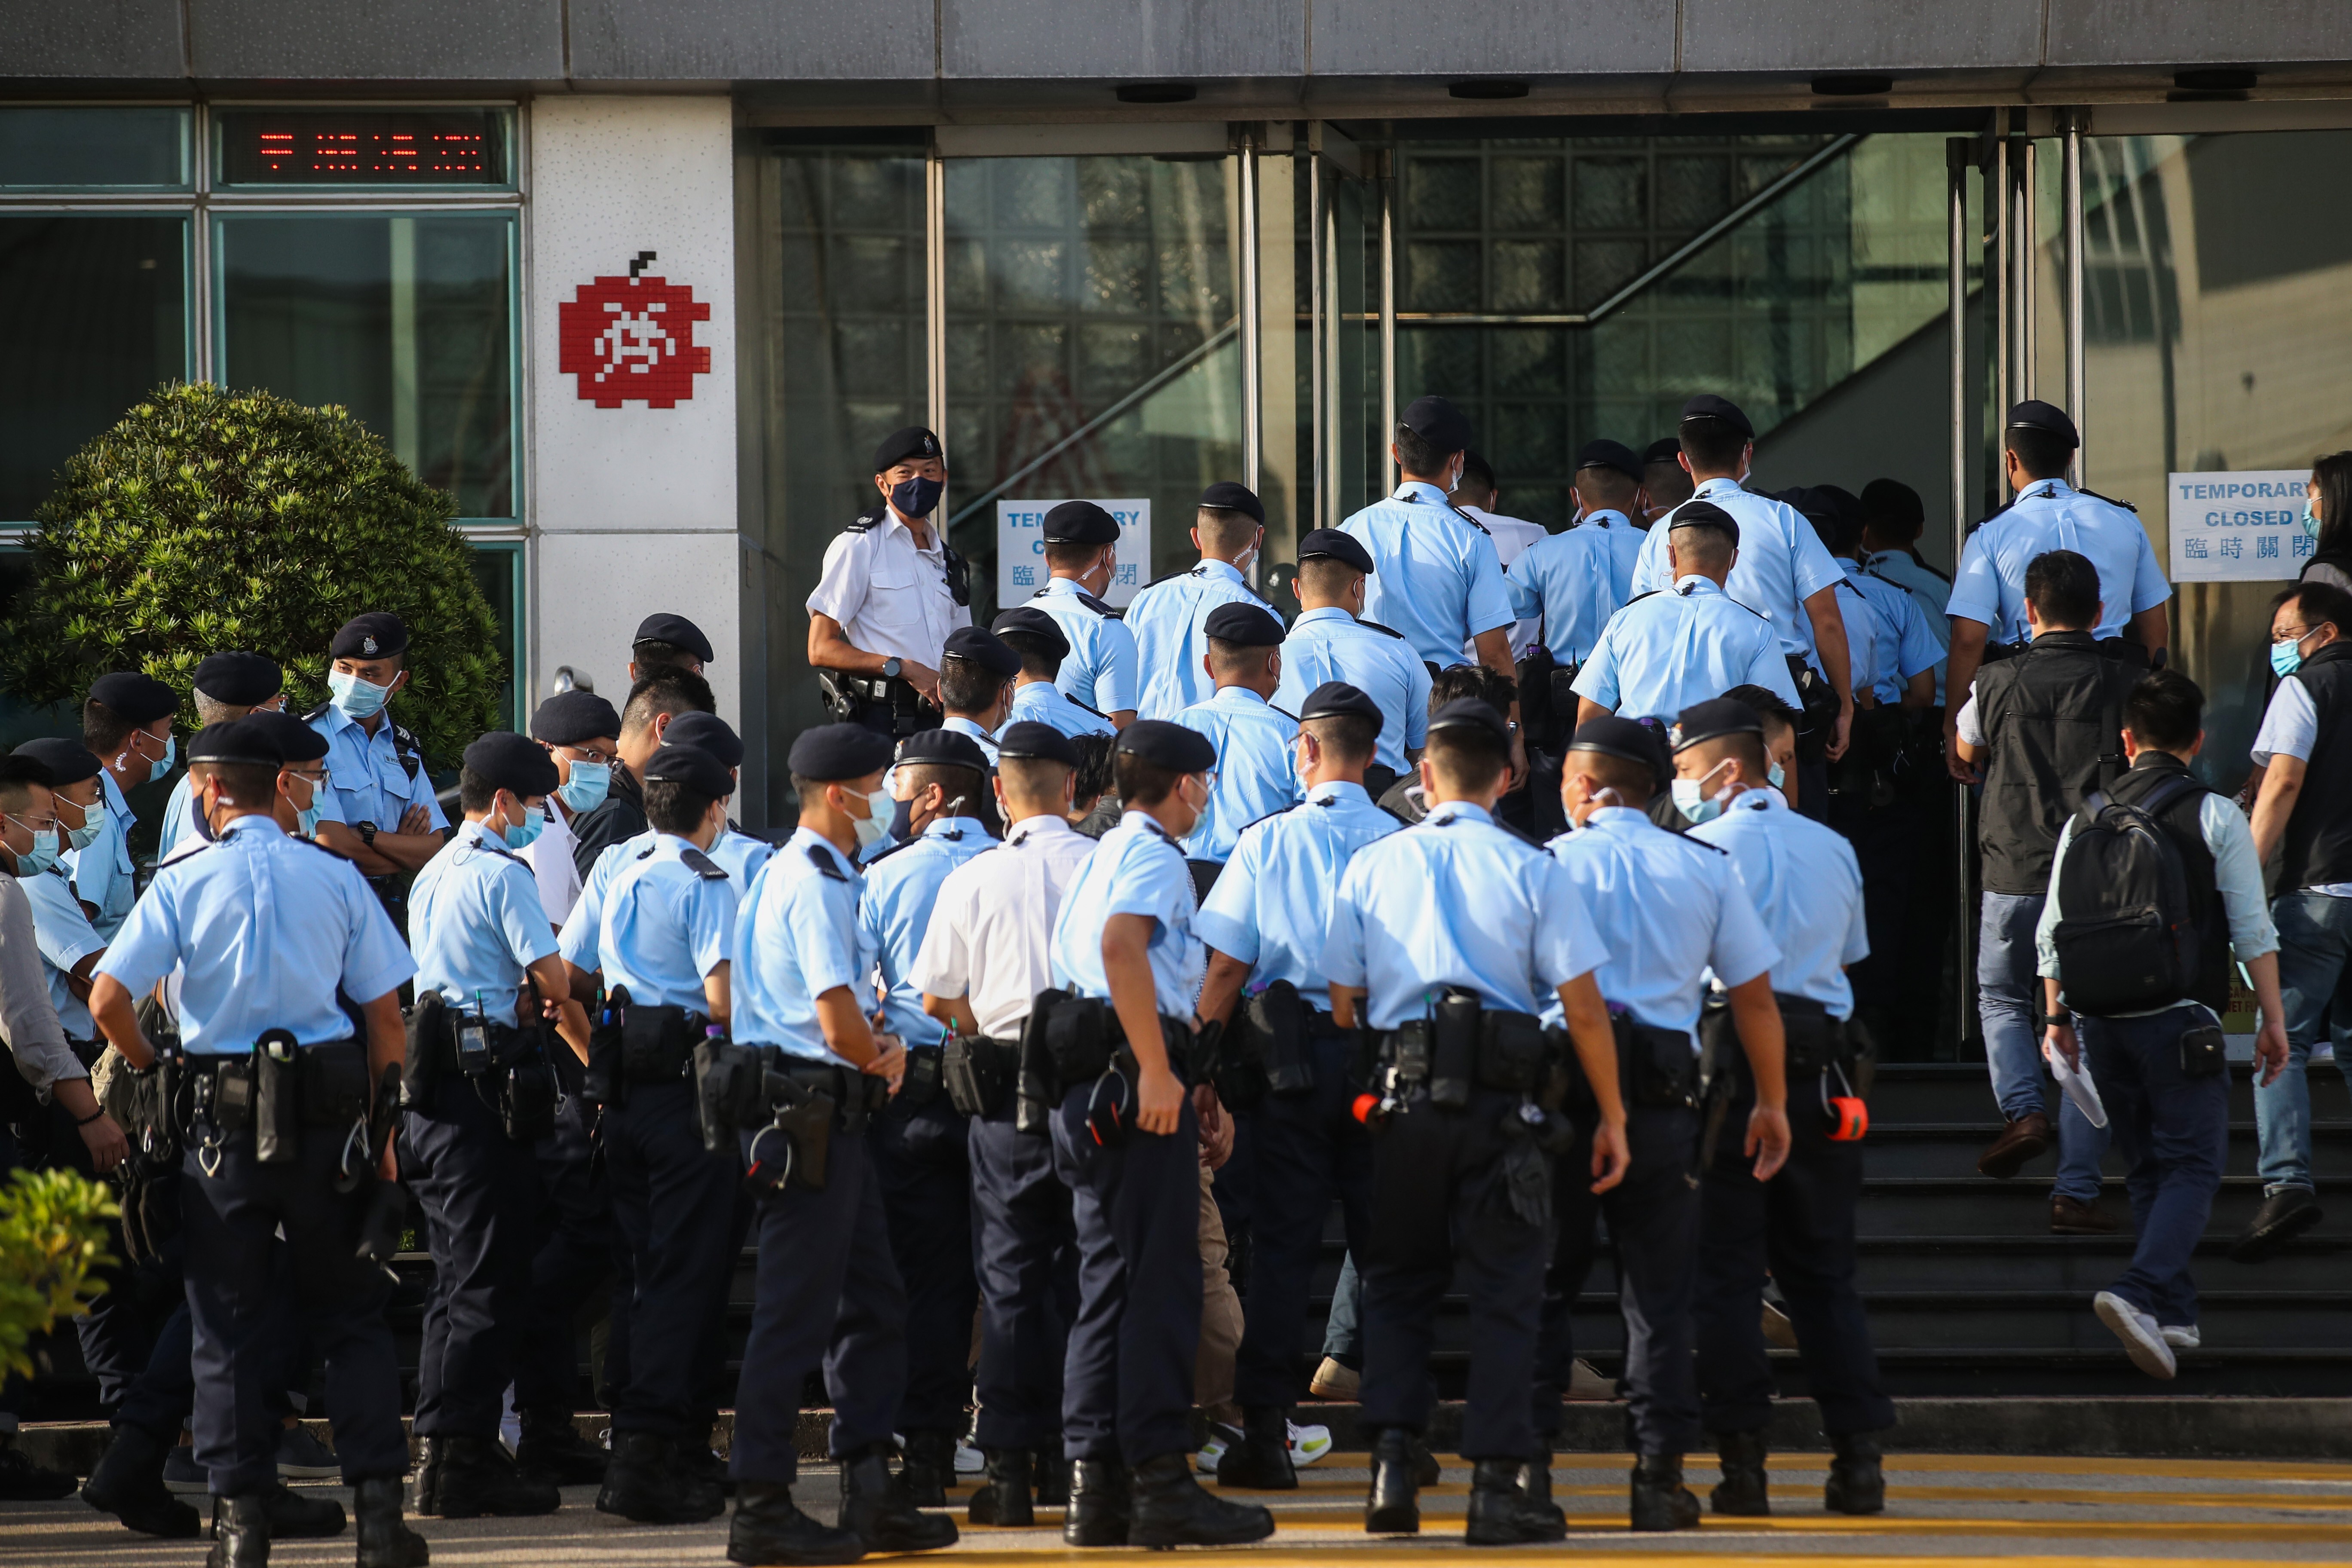 Police officers set up cordon line outside Next Digital Limited building in Tseung Kwan O. (Photo: SCMP / Winson Wong)